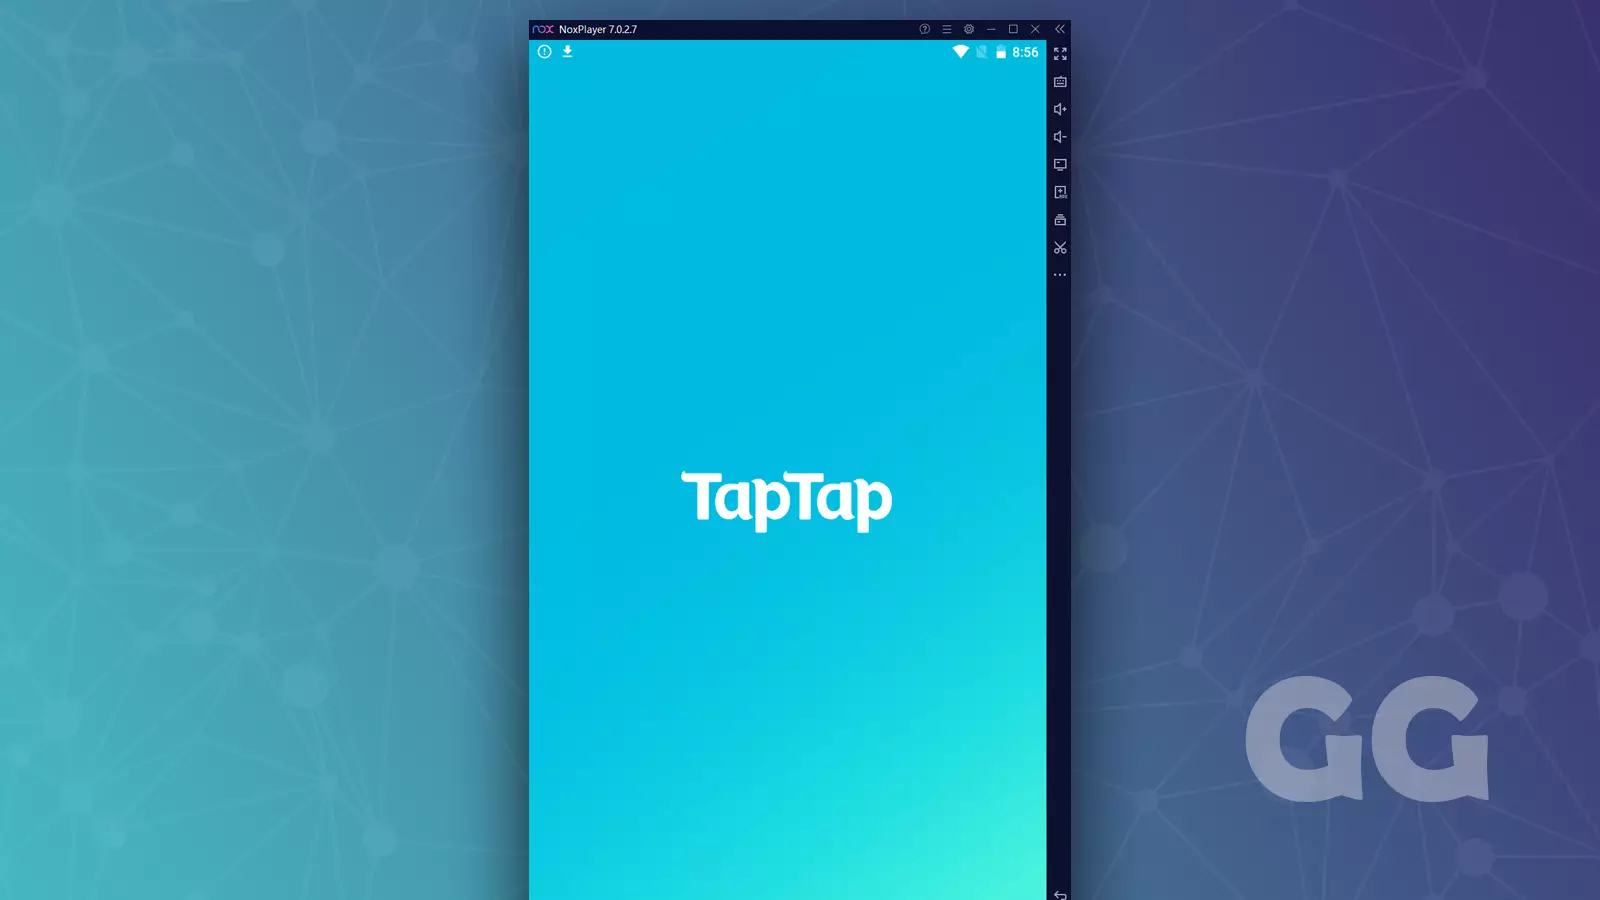 nox player vertical app and taptap logo